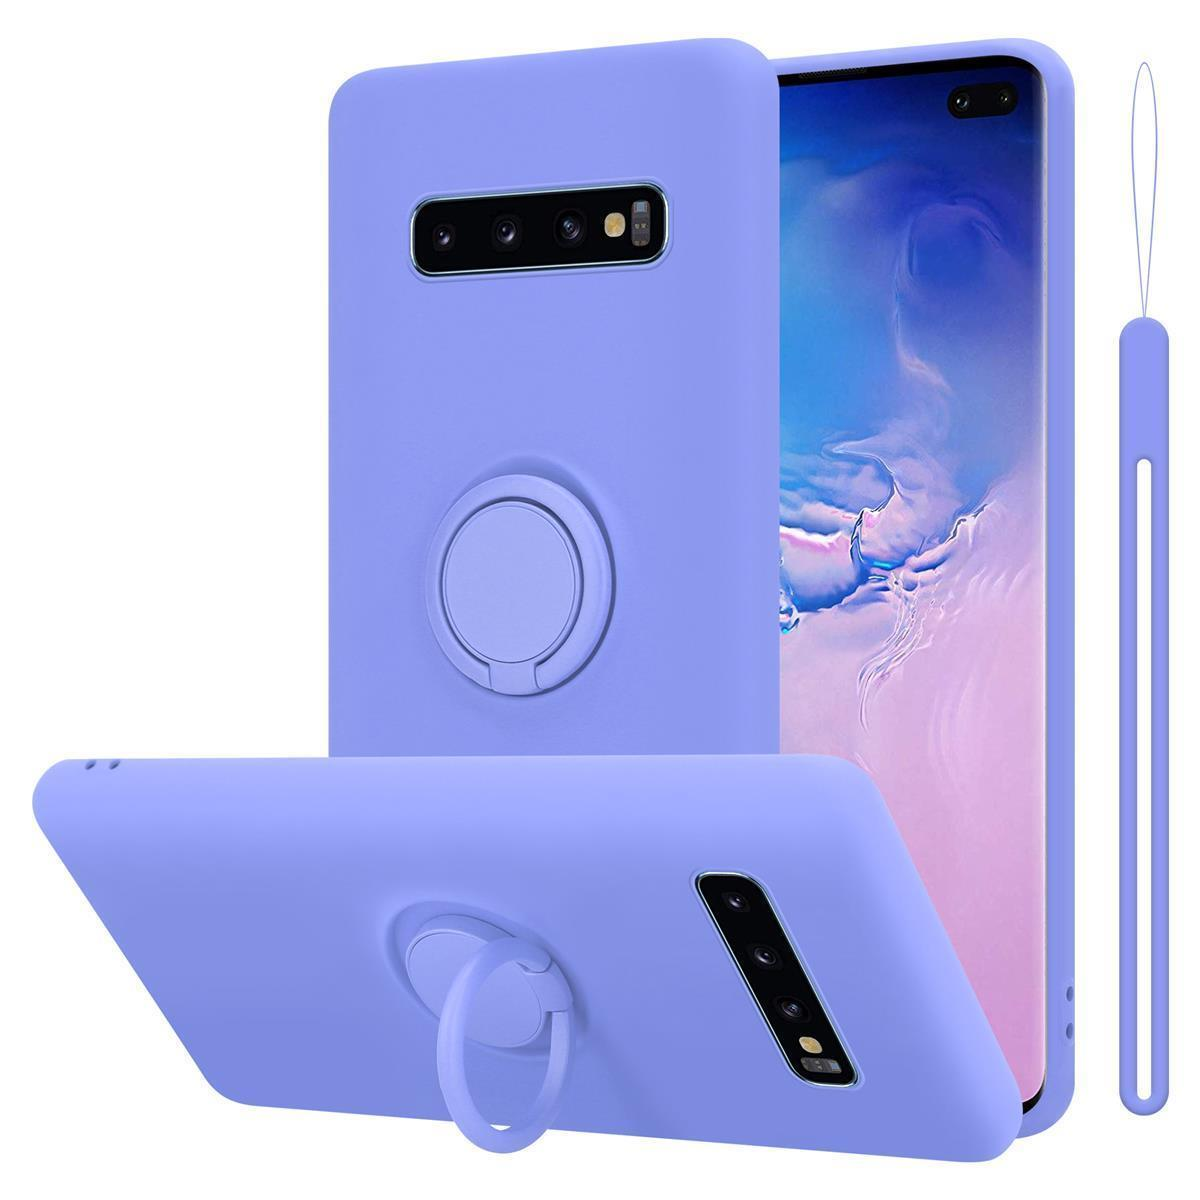 Hülle Samsung, Silicone HELL im Galaxy PLUS, S10 Liquid CADORABO LILA LIQUID Style, Ring Case Backcover,